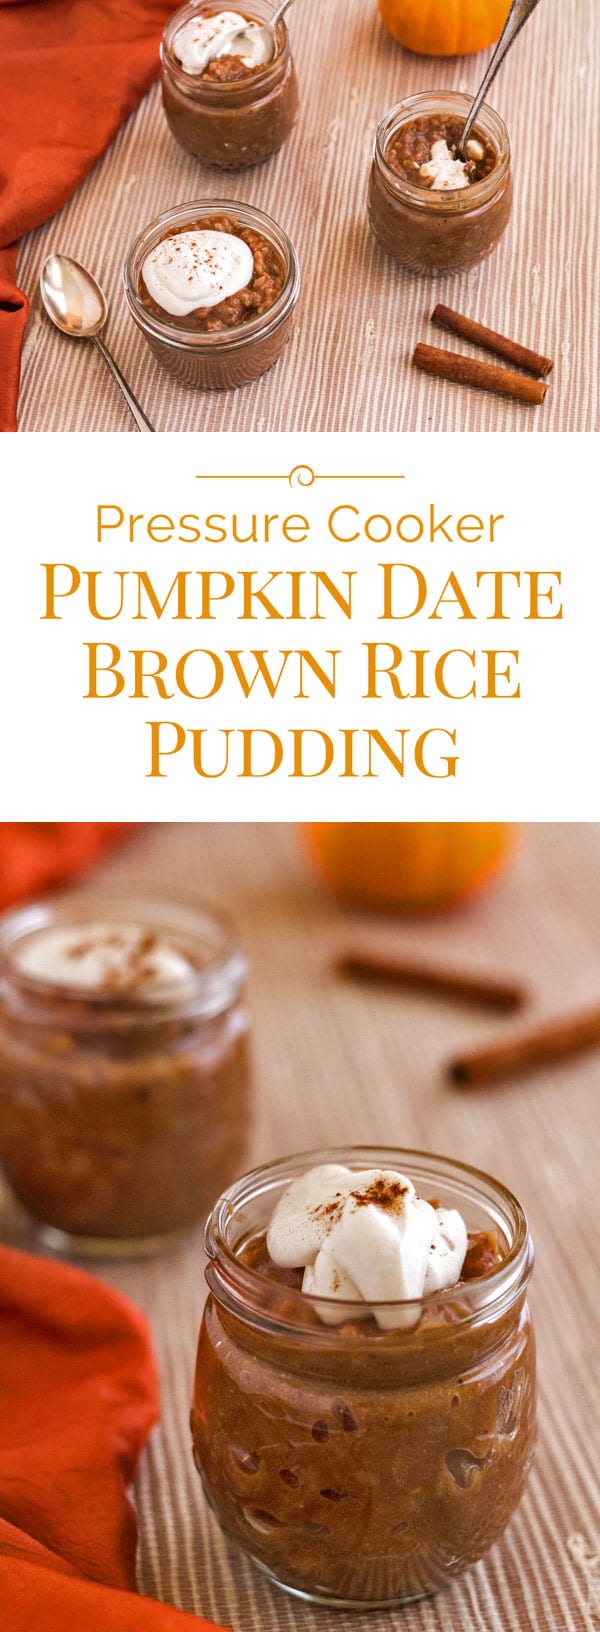 pumpkin date brown rice pudding photo collage